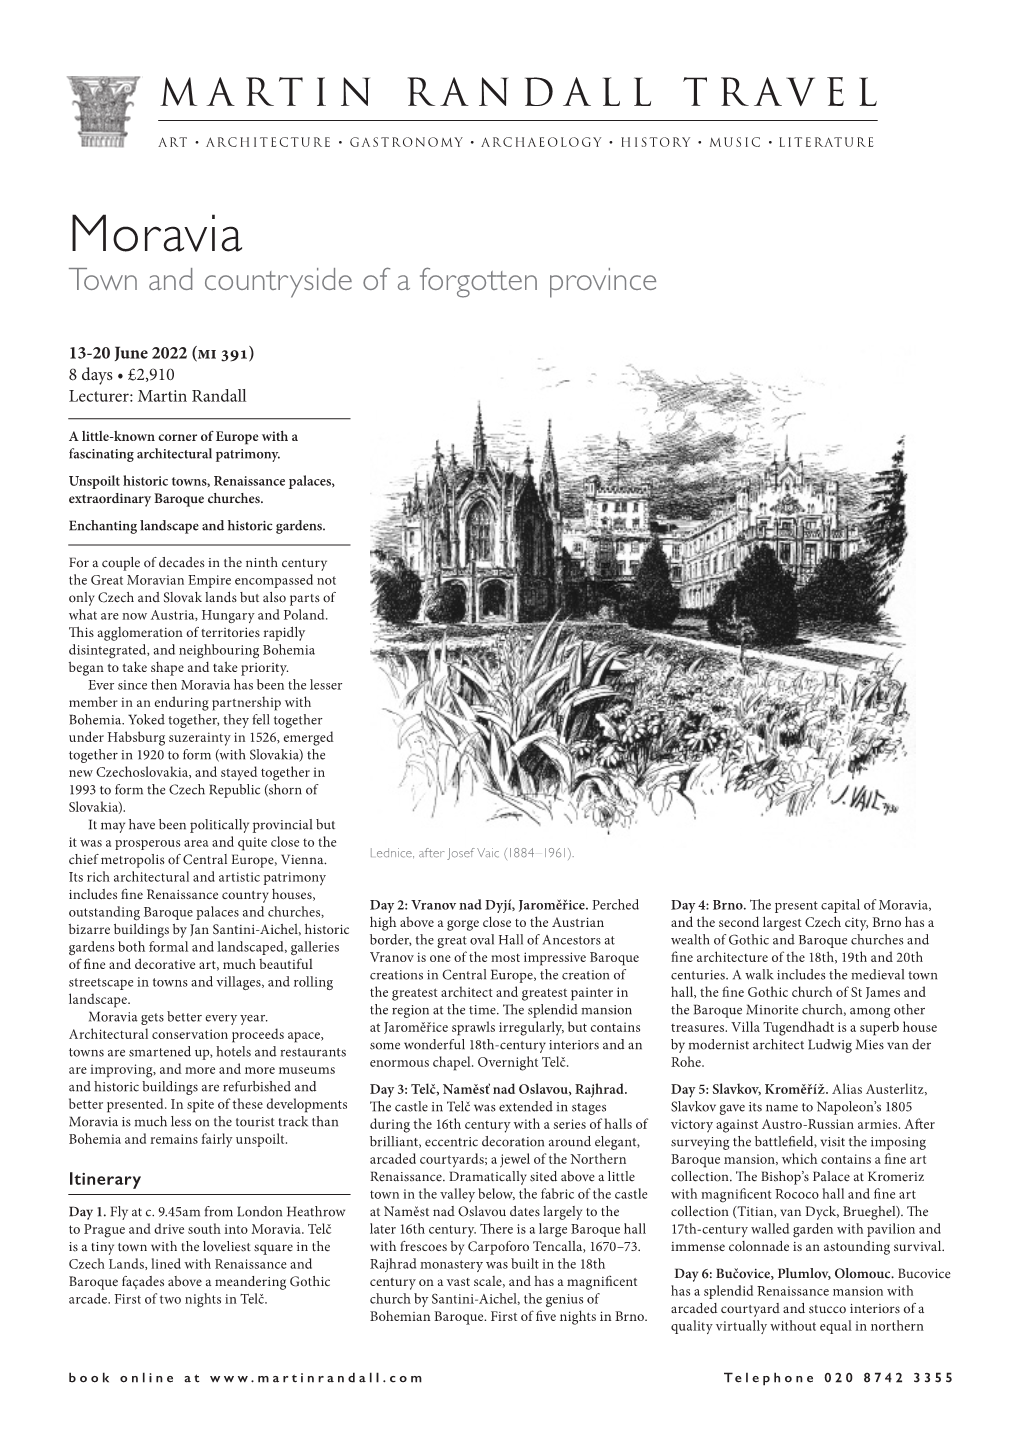 Moravia Town and Countryside of a Forgotten Province